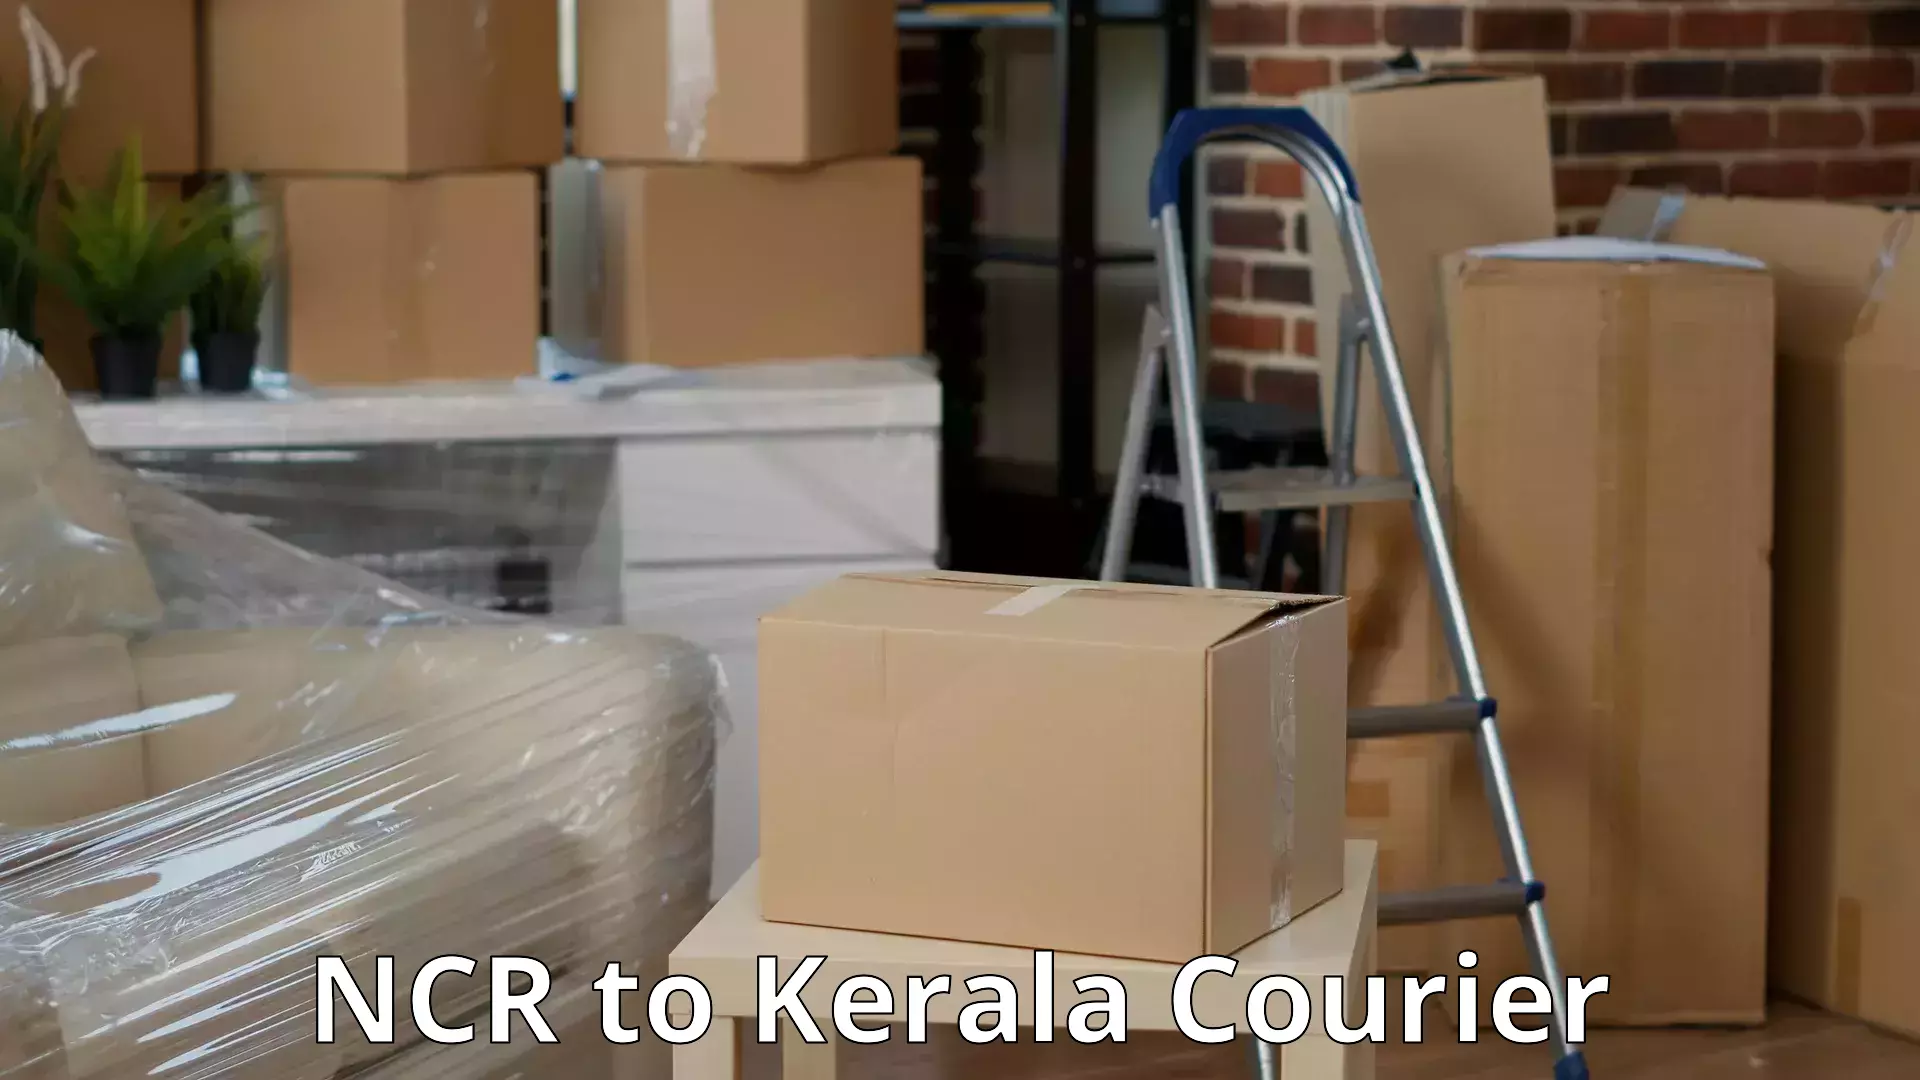 Skilled furniture transport NCR to Ramankary